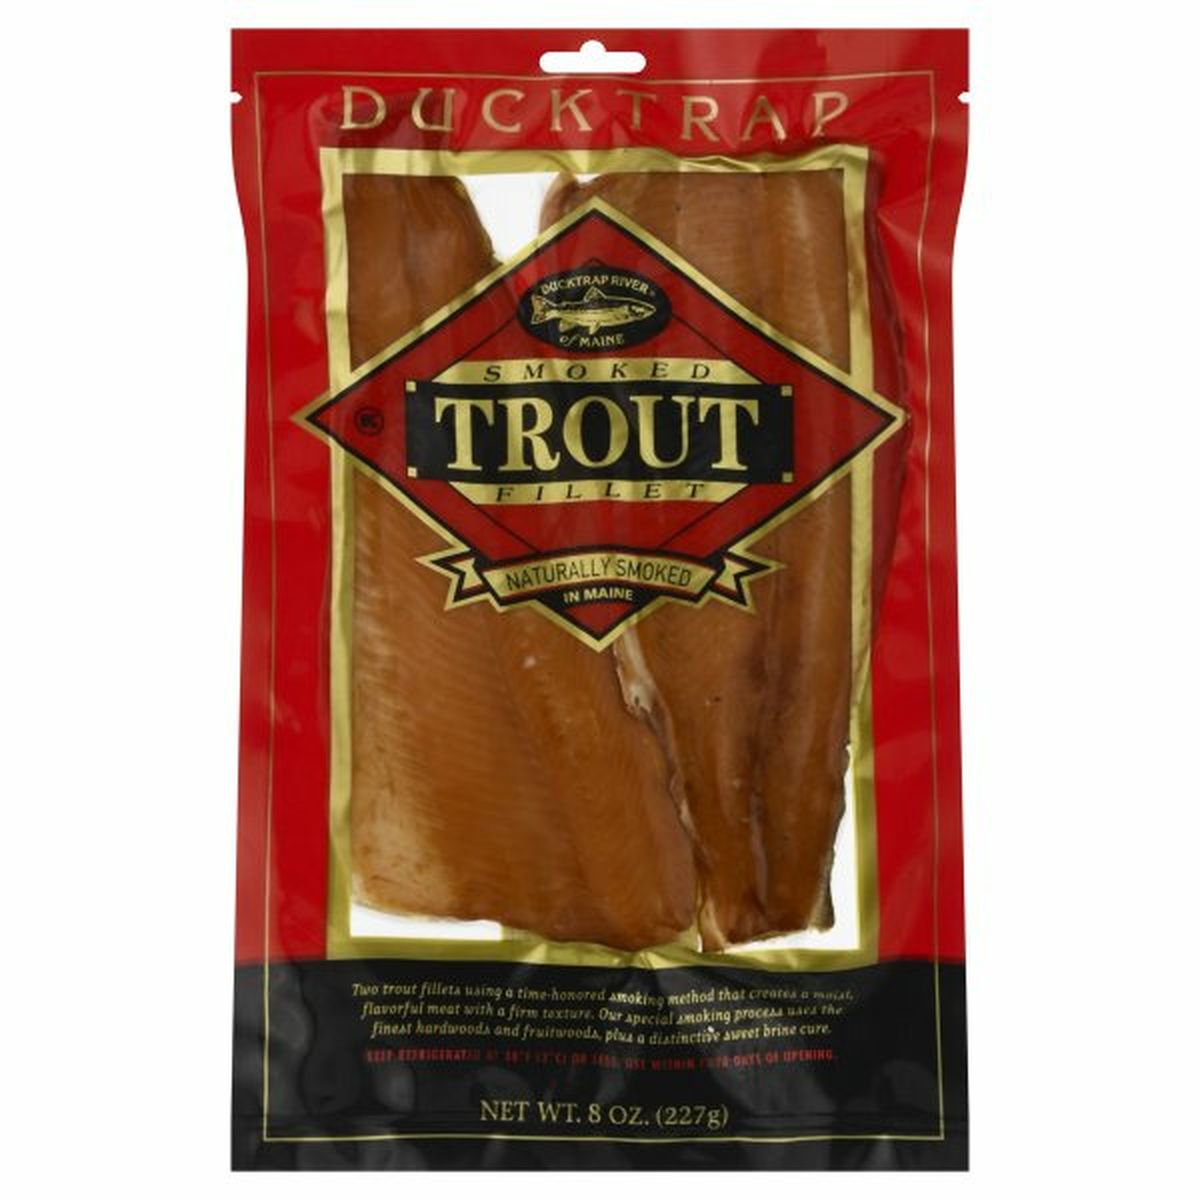 Calories in Ducktrap River of Maine Fillets, Trout, Smoked